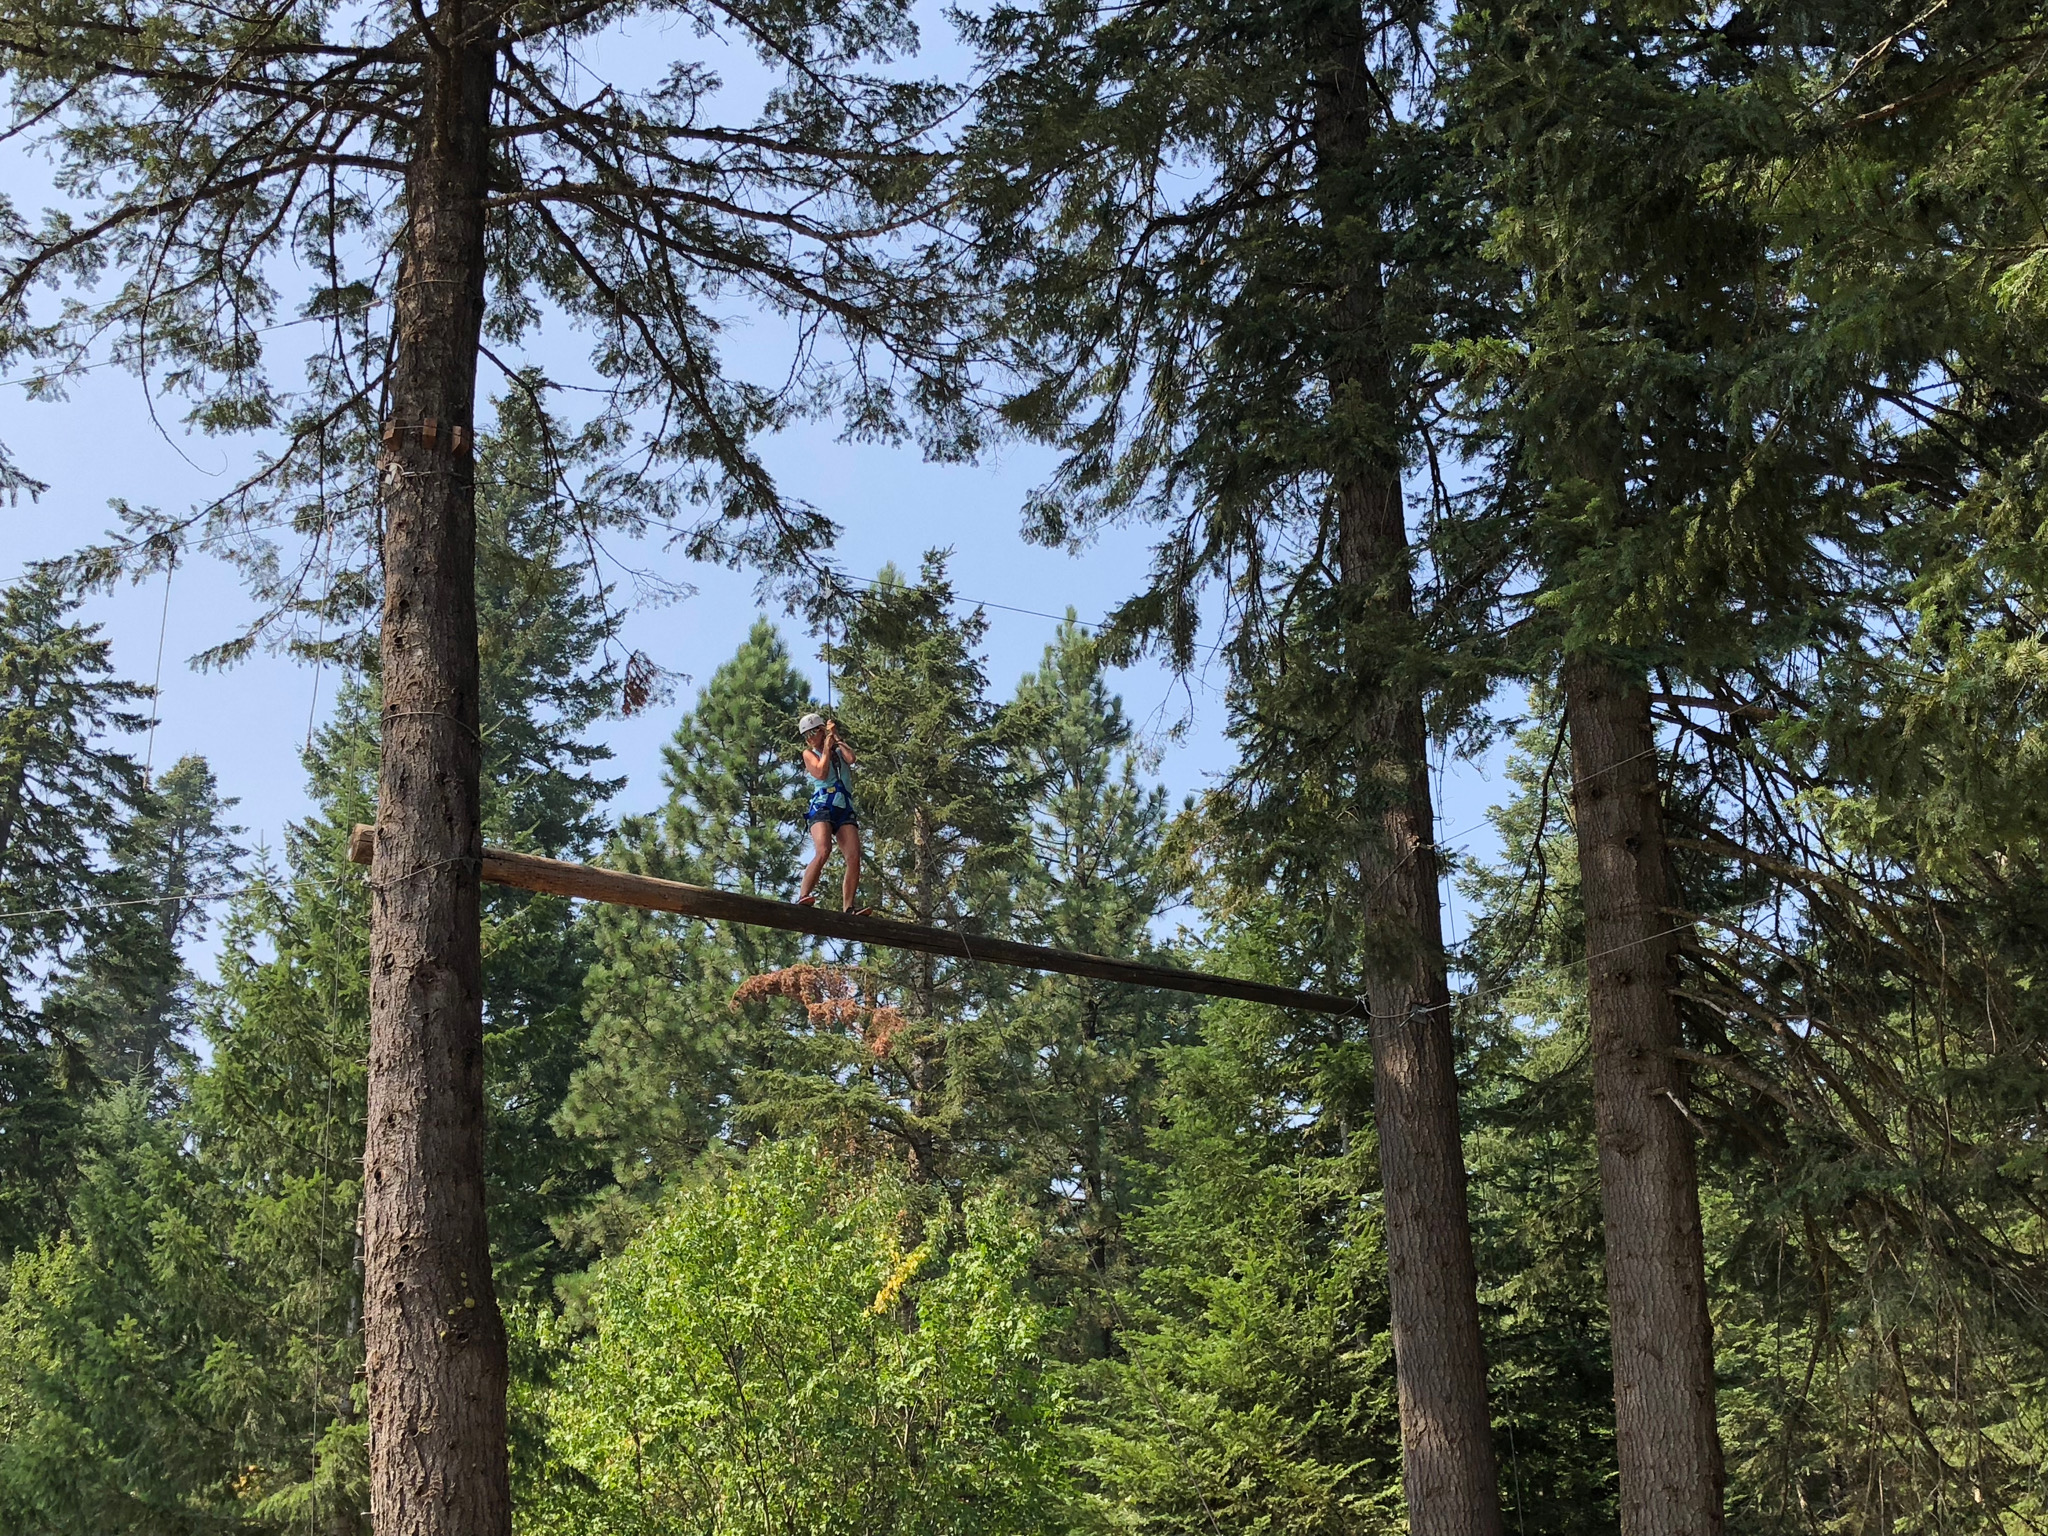 Person on challenge course.